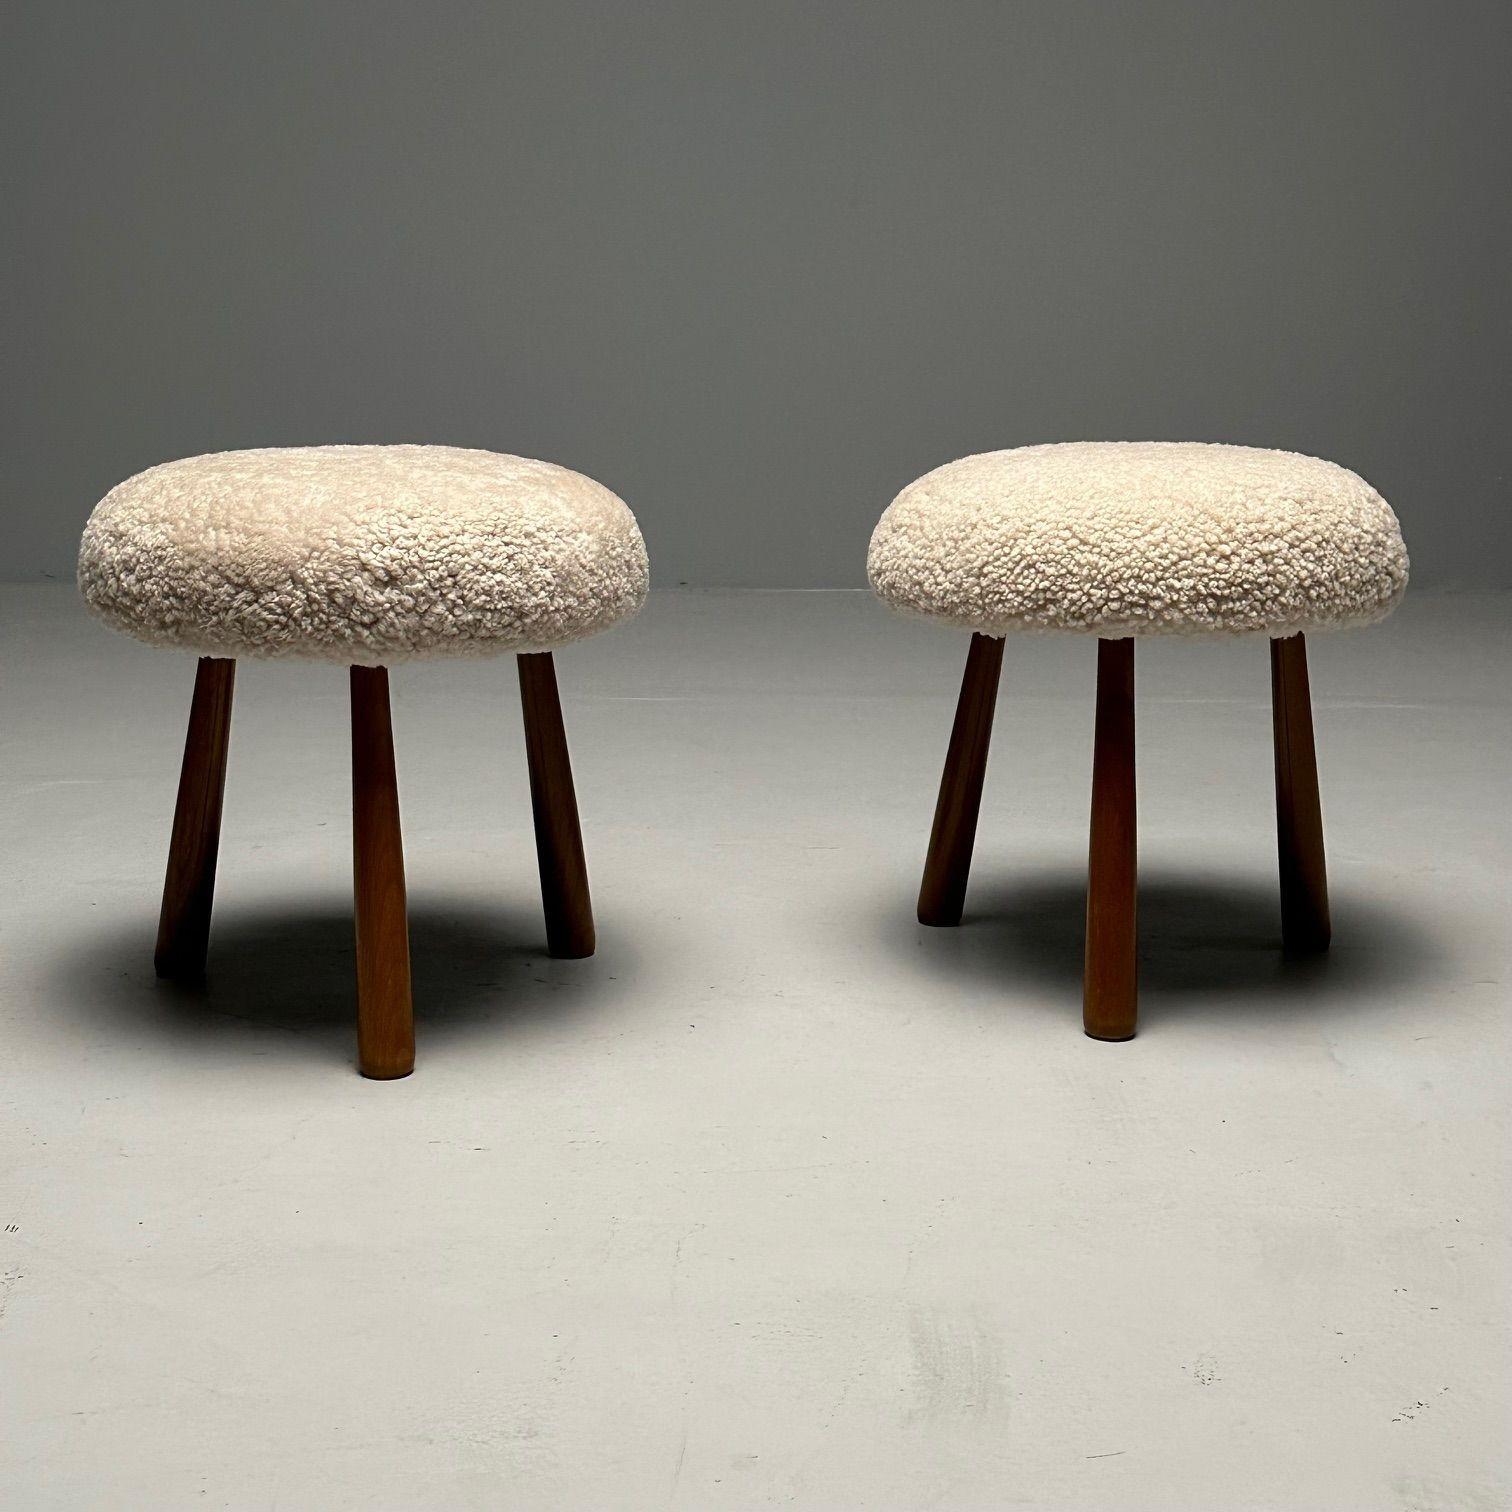 Pair Contemporary Sheepskin Stools / Ottomans, Swedish Modern Style, Shearling For Sale 3